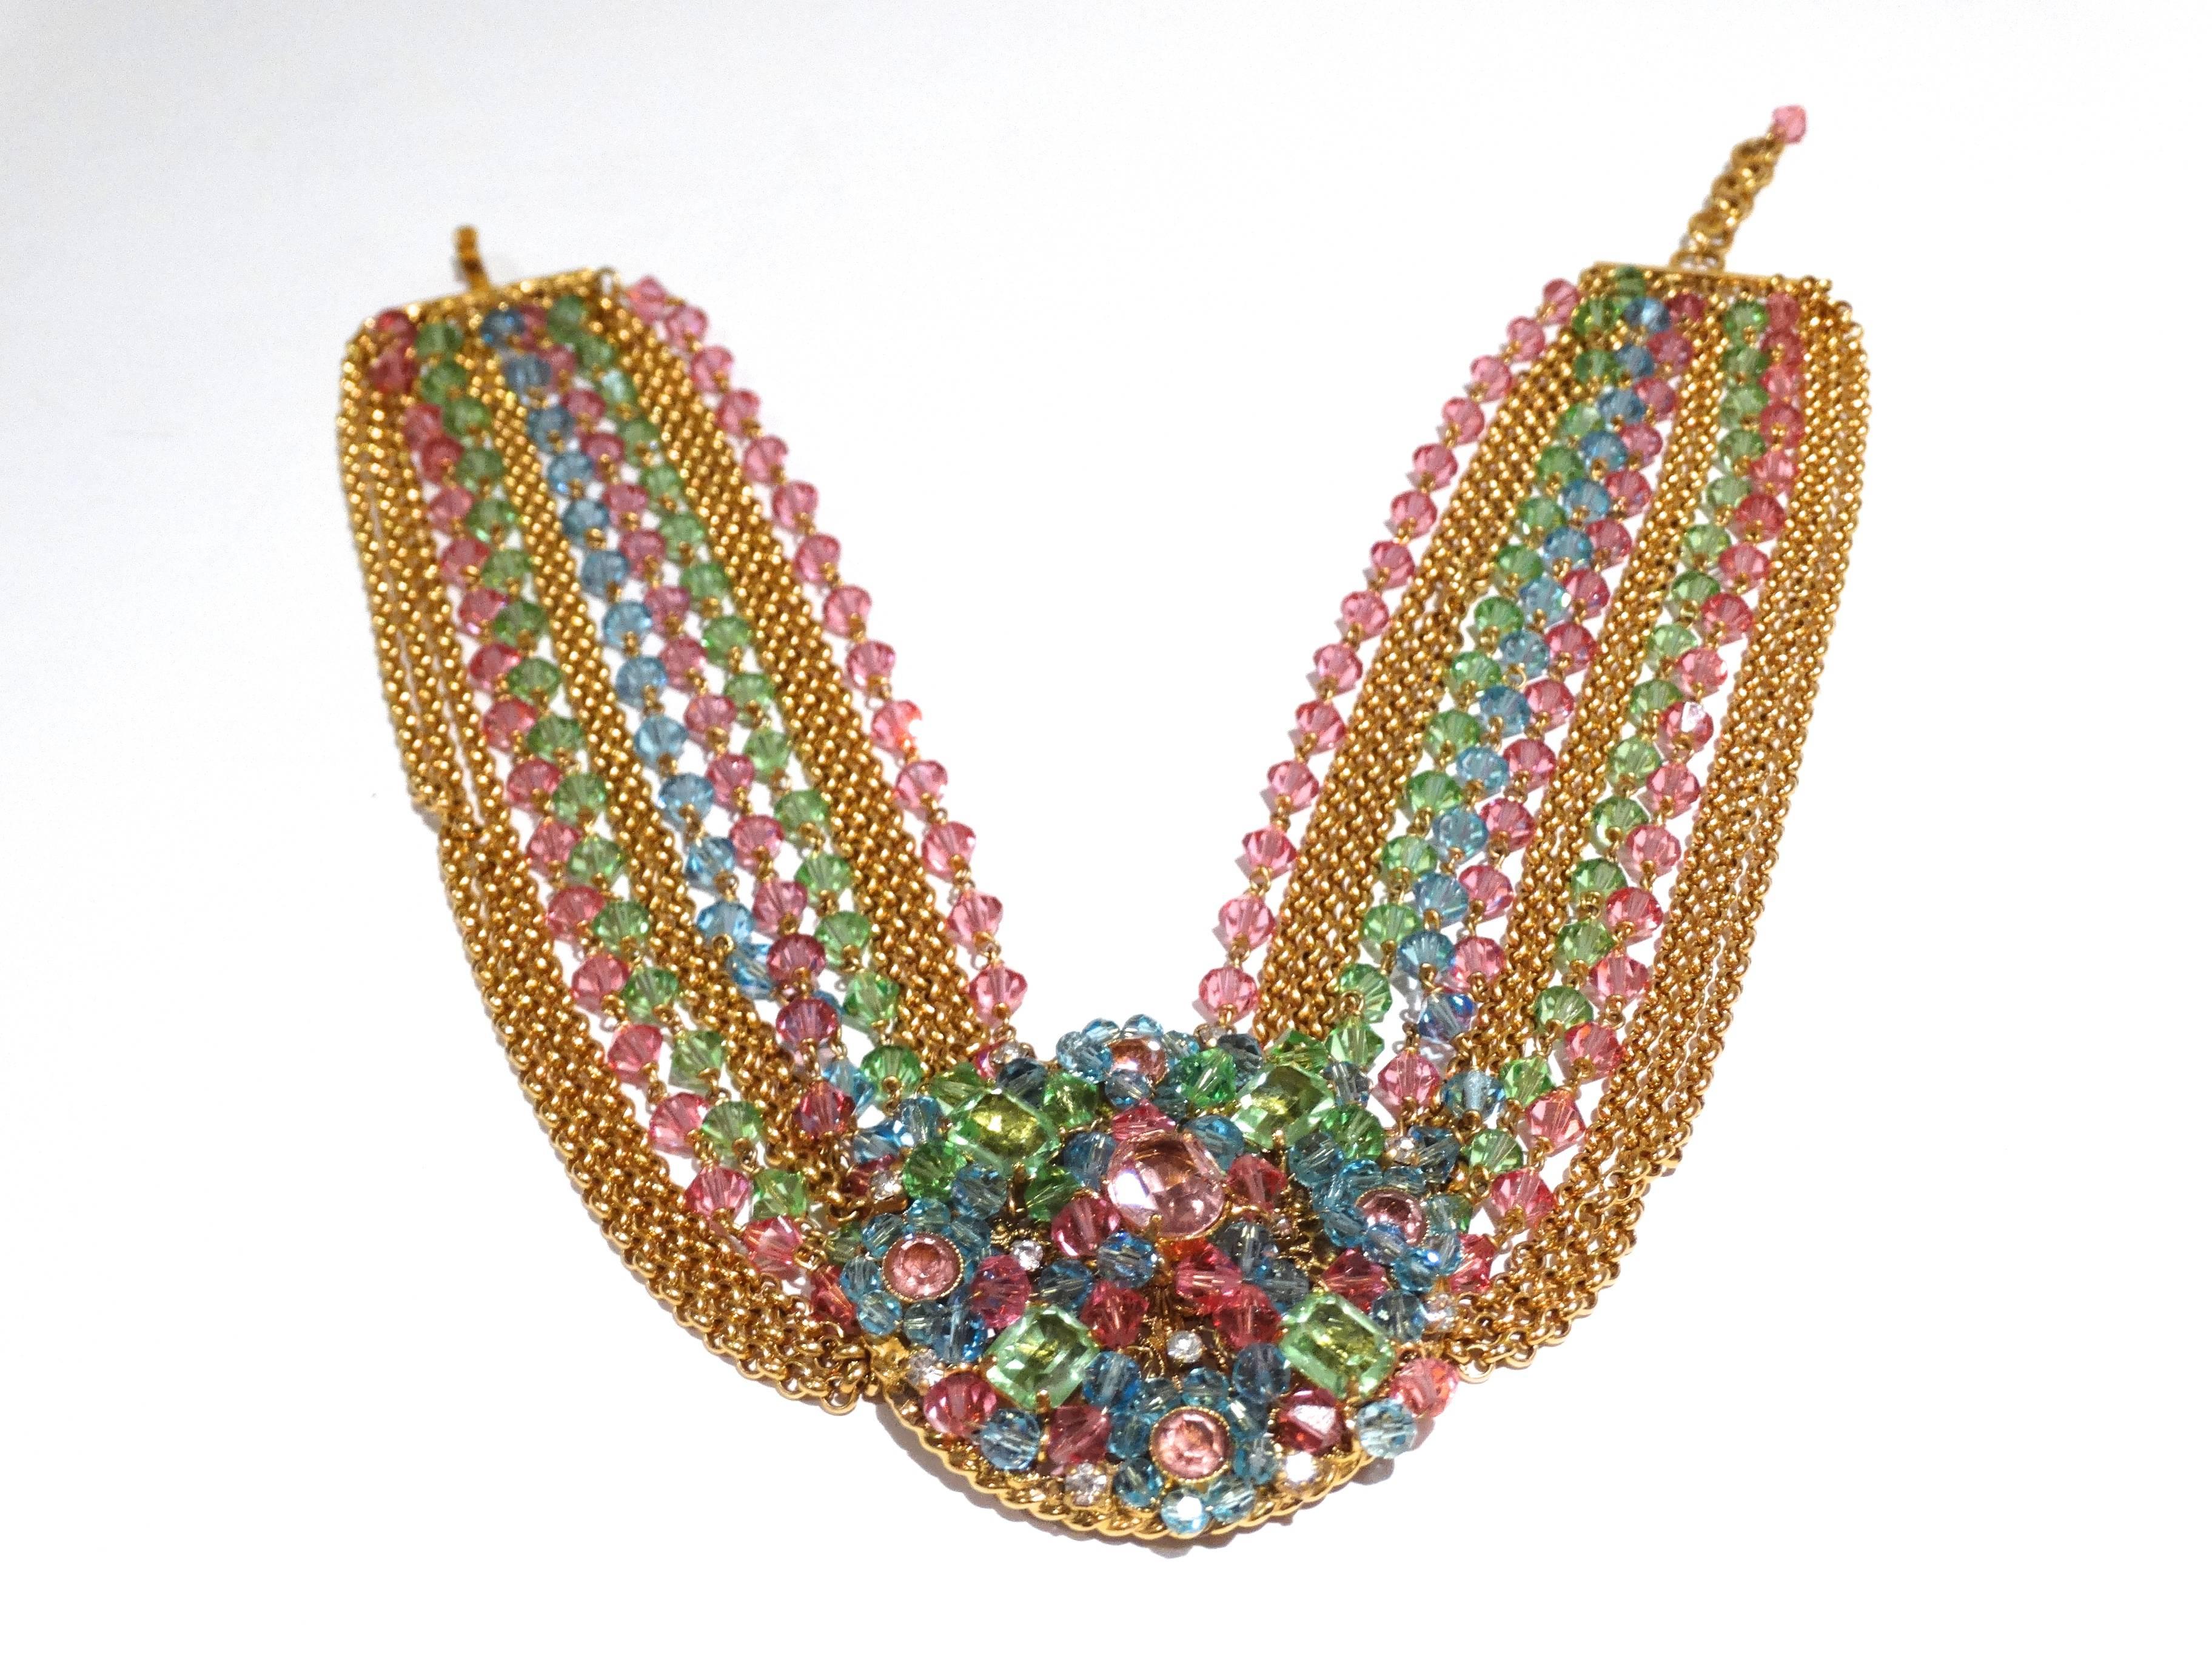 Rare late 70's Chanel multi colored (pink, green,blue and rose) crystal glass collar necklace with large center pendent. Pendent features floral design with 4 large emerald cut crystal stones and multiple clear crystal rhinestones throughout. The